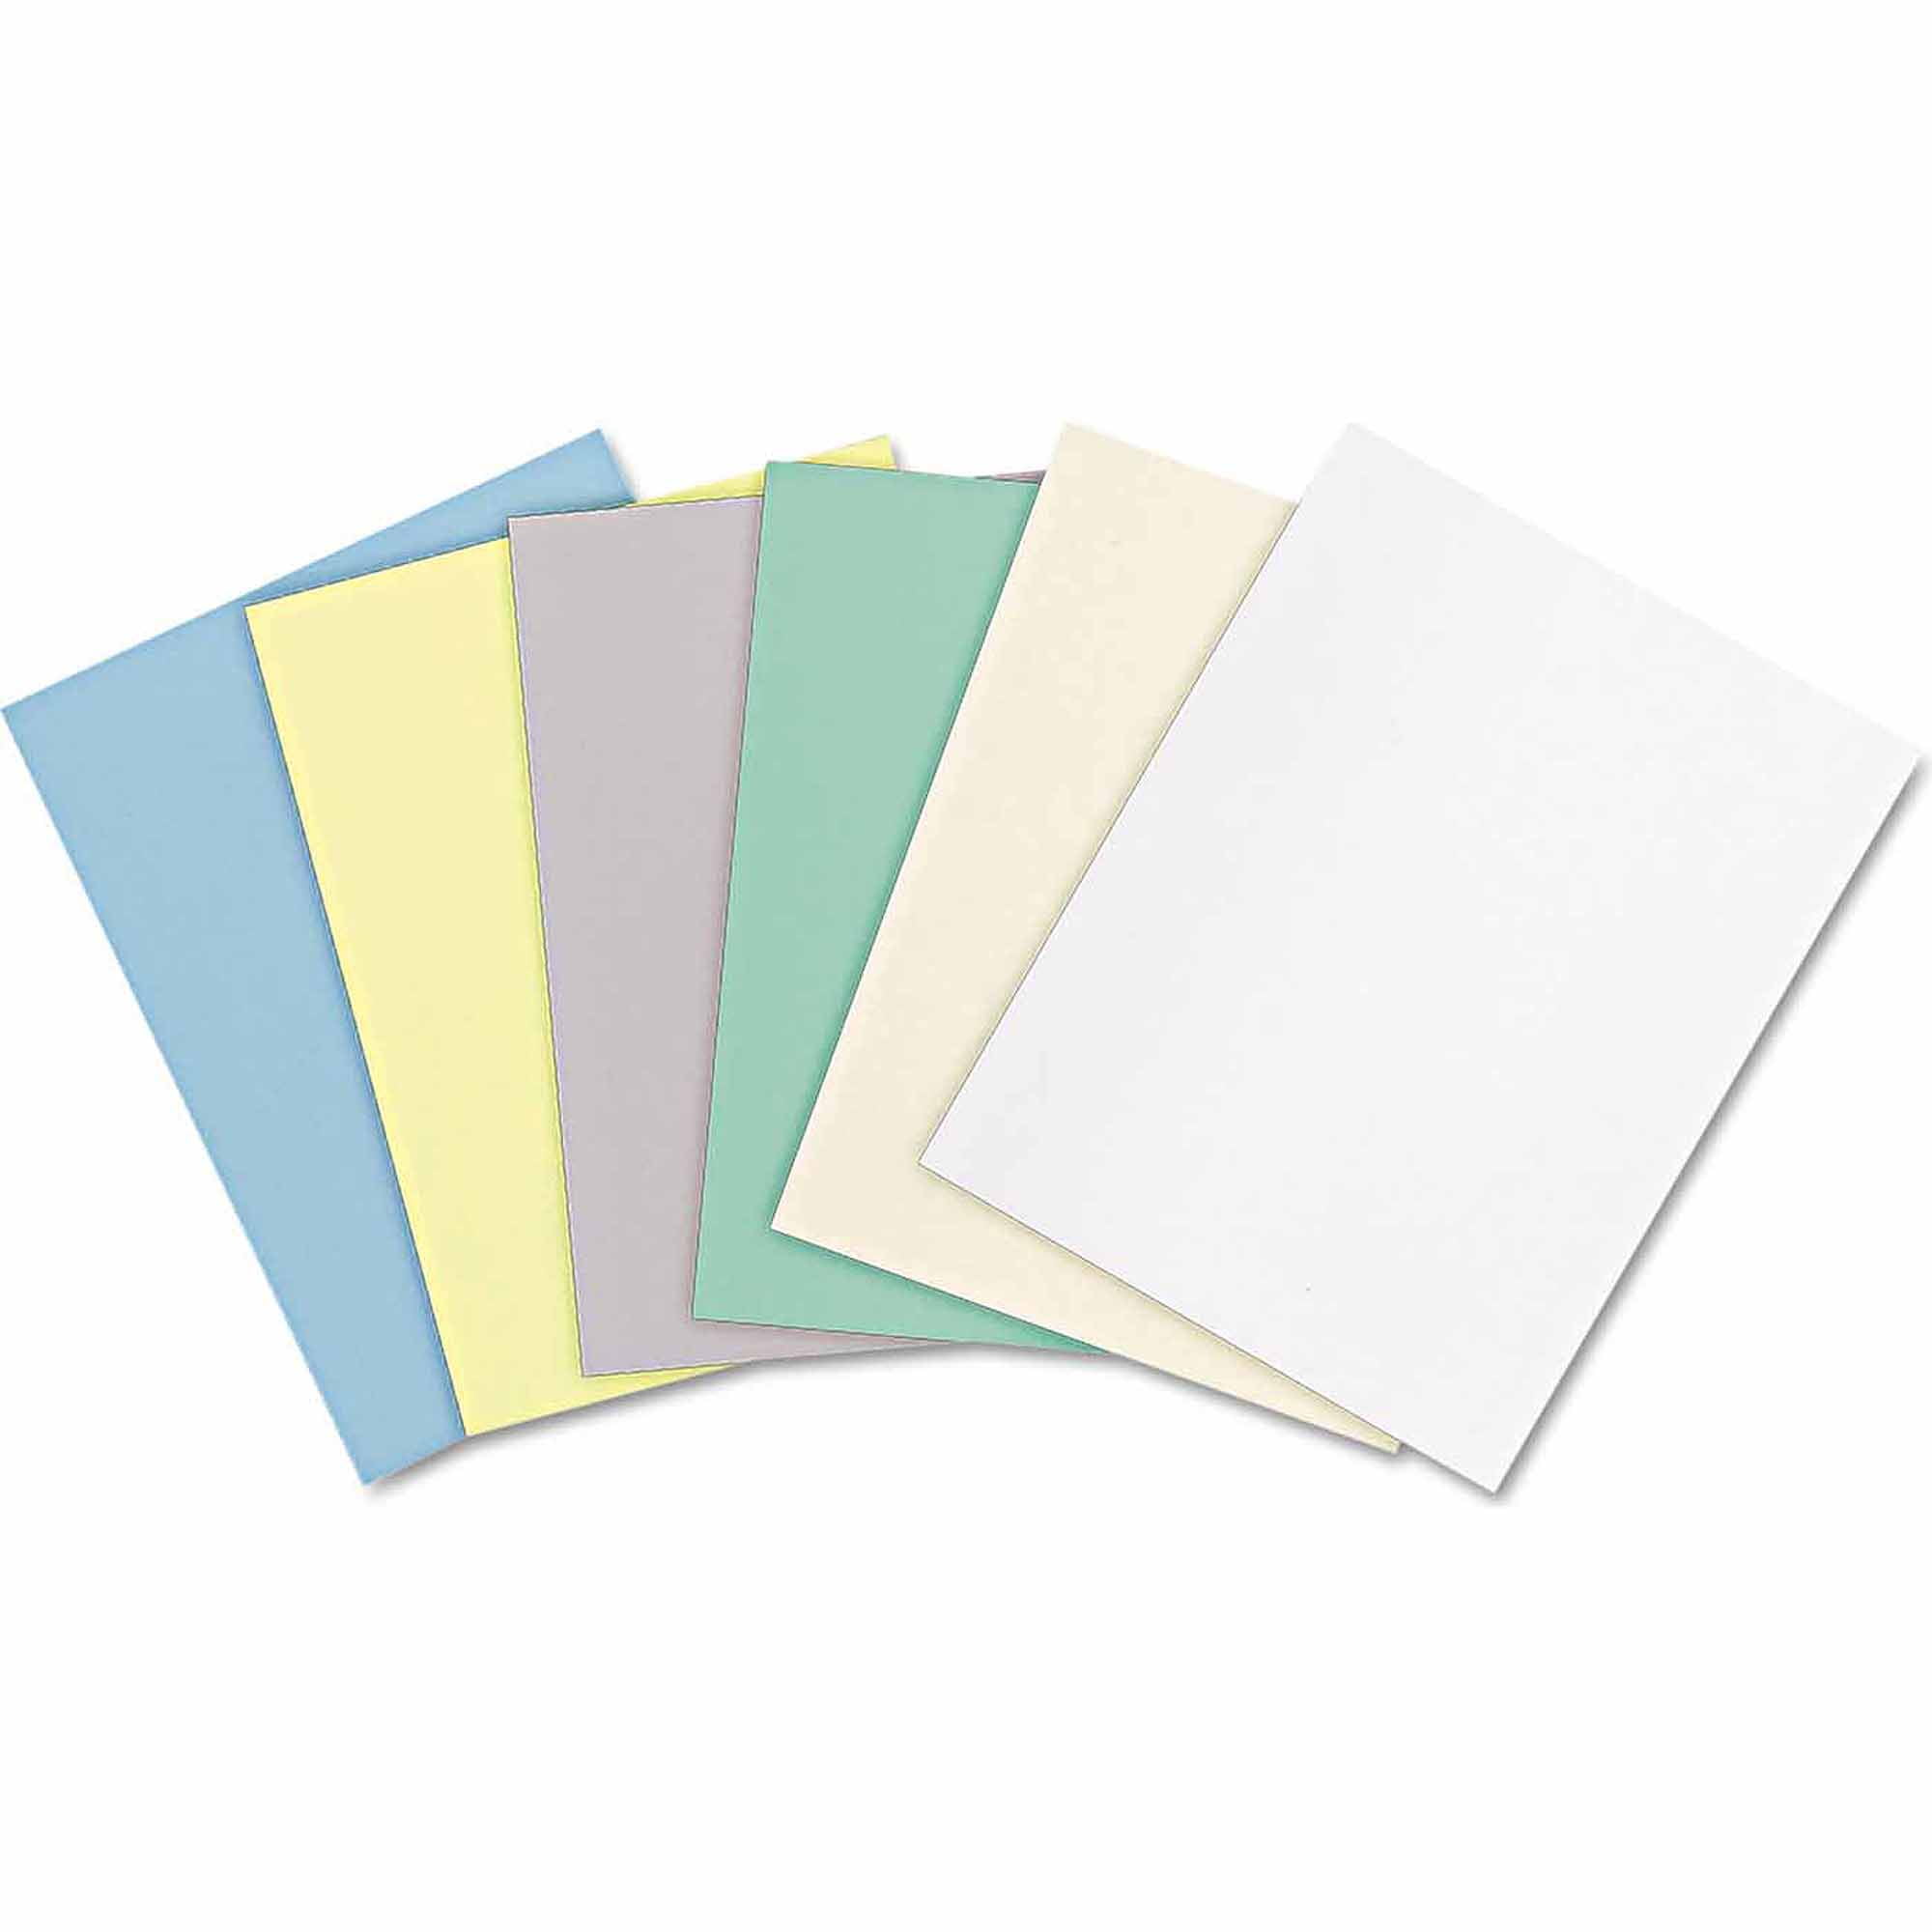 Canson XL Series Bristol Paper, Smooth, Foldover Pad, 9x12 inches